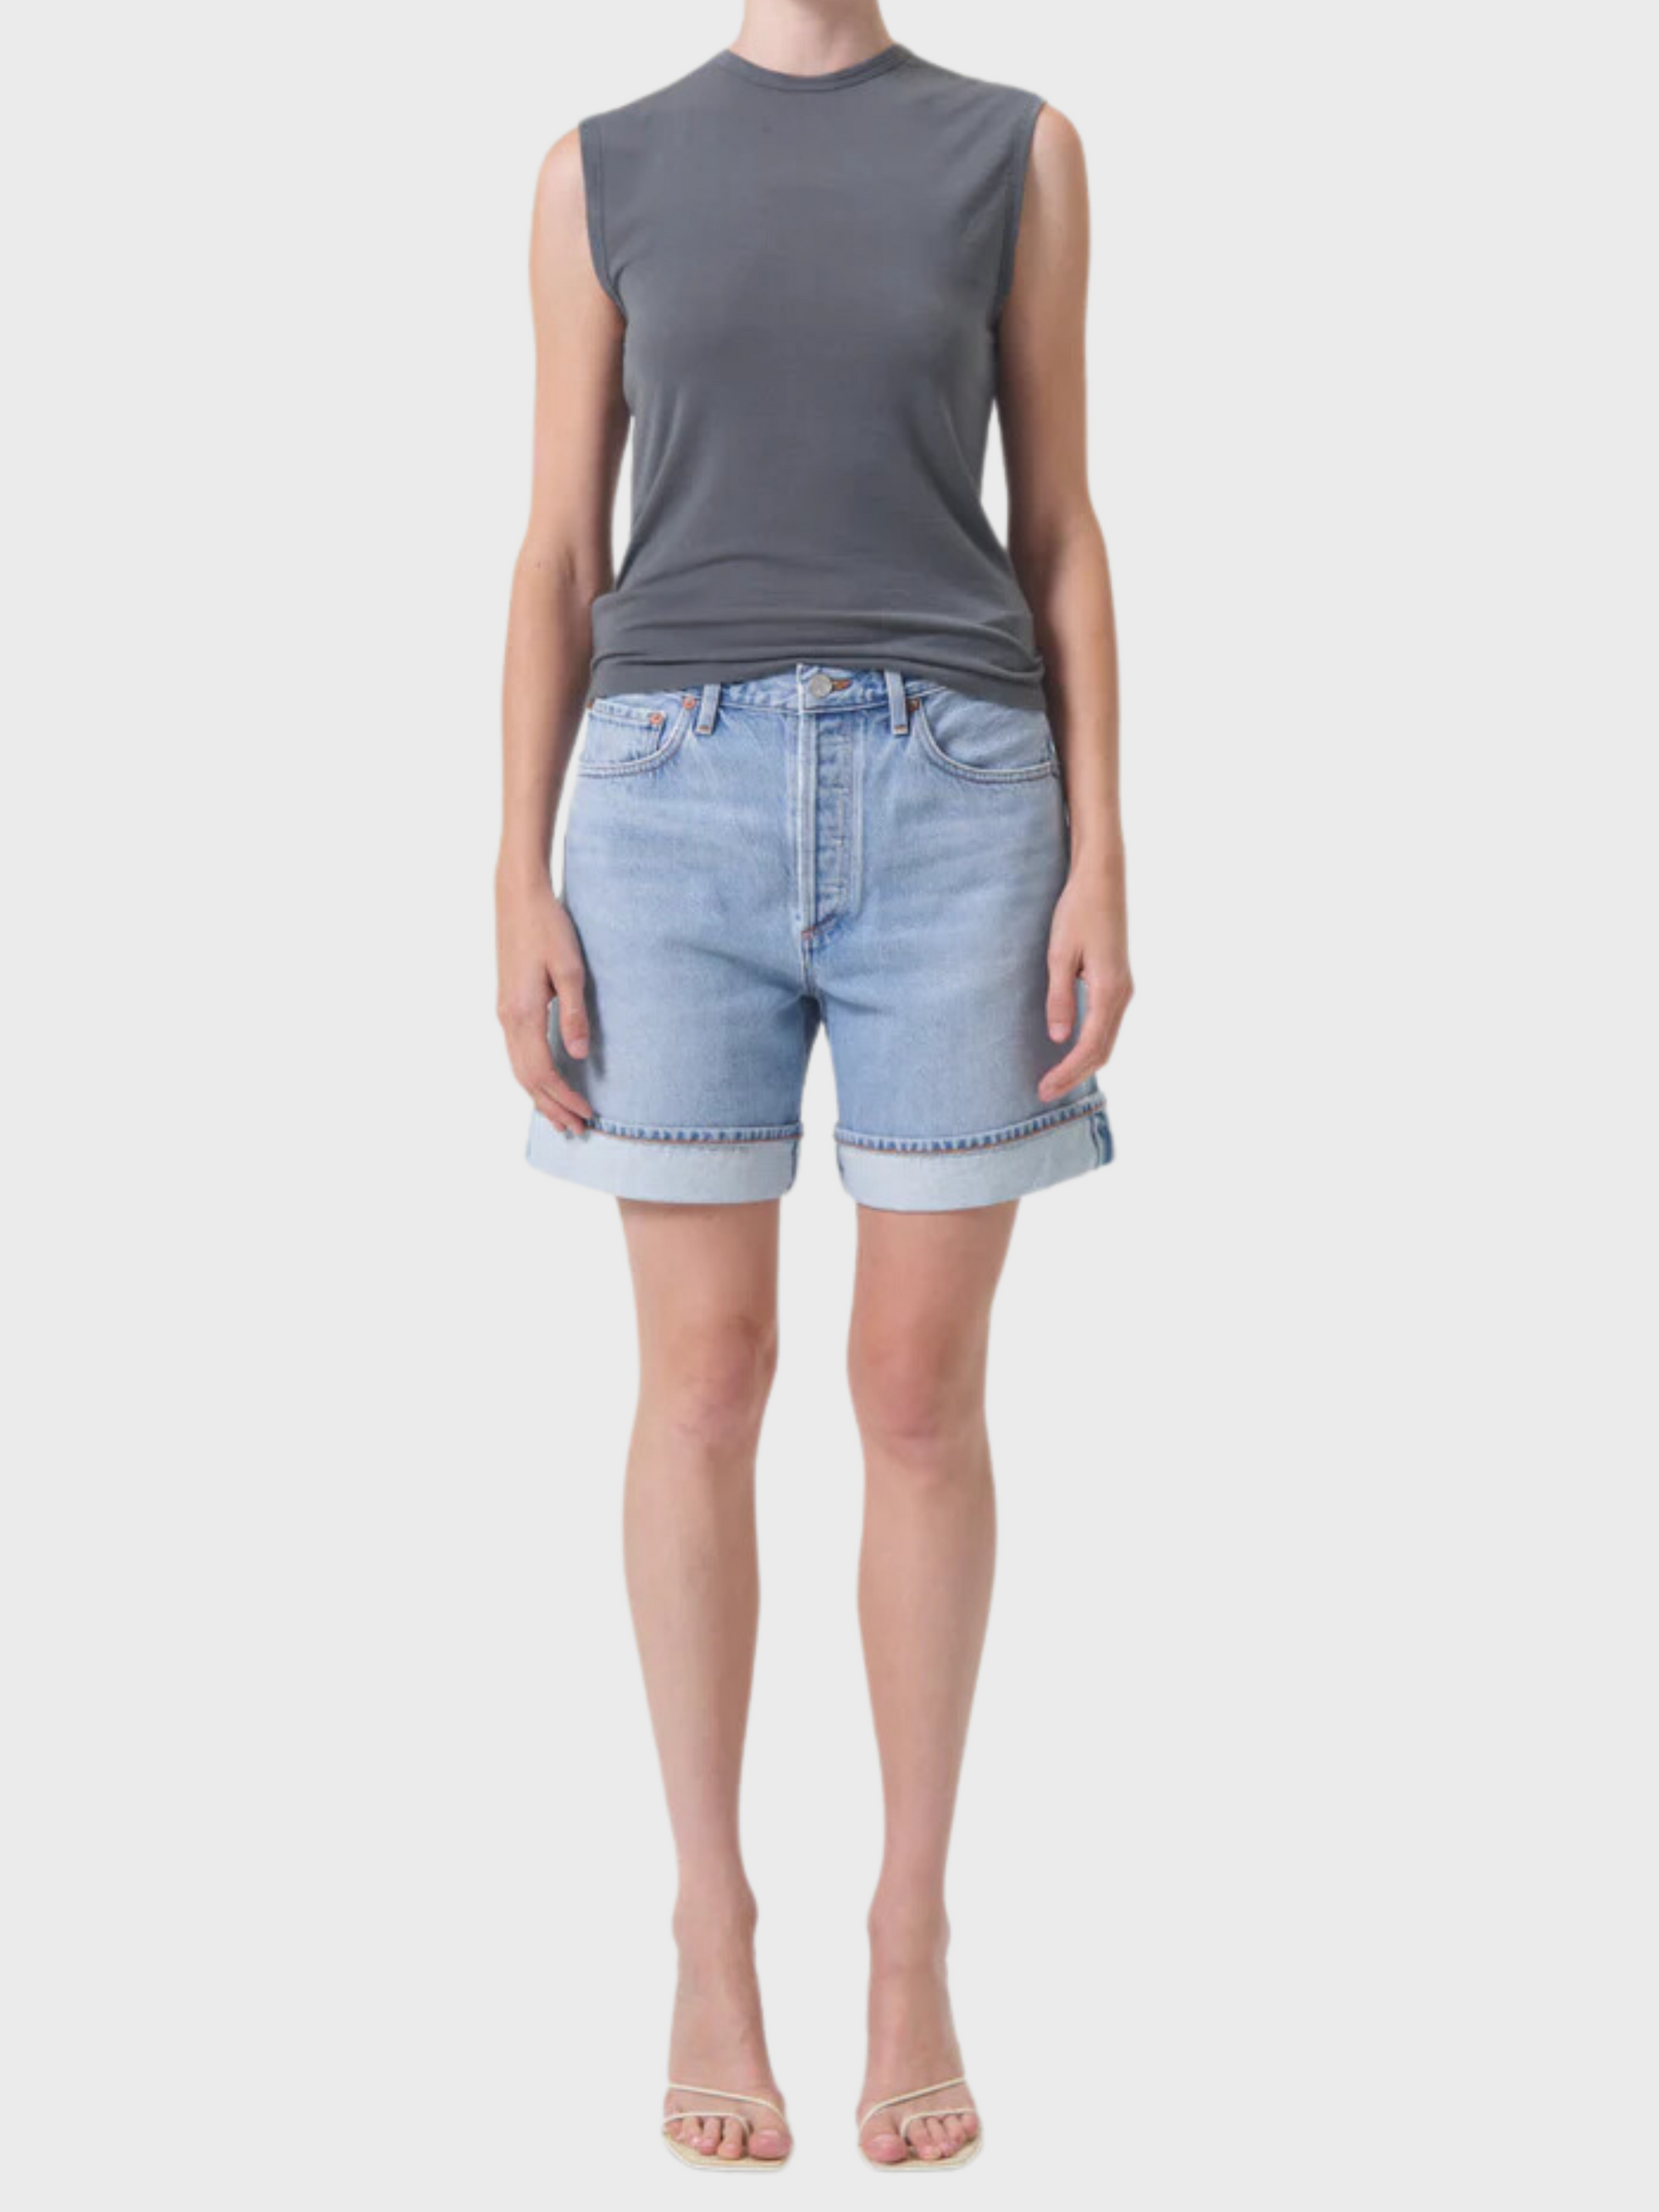 Agolde Dame Denim Short Tension-Shorts-23-West of Woodward Boutique-Vancouver-Canada